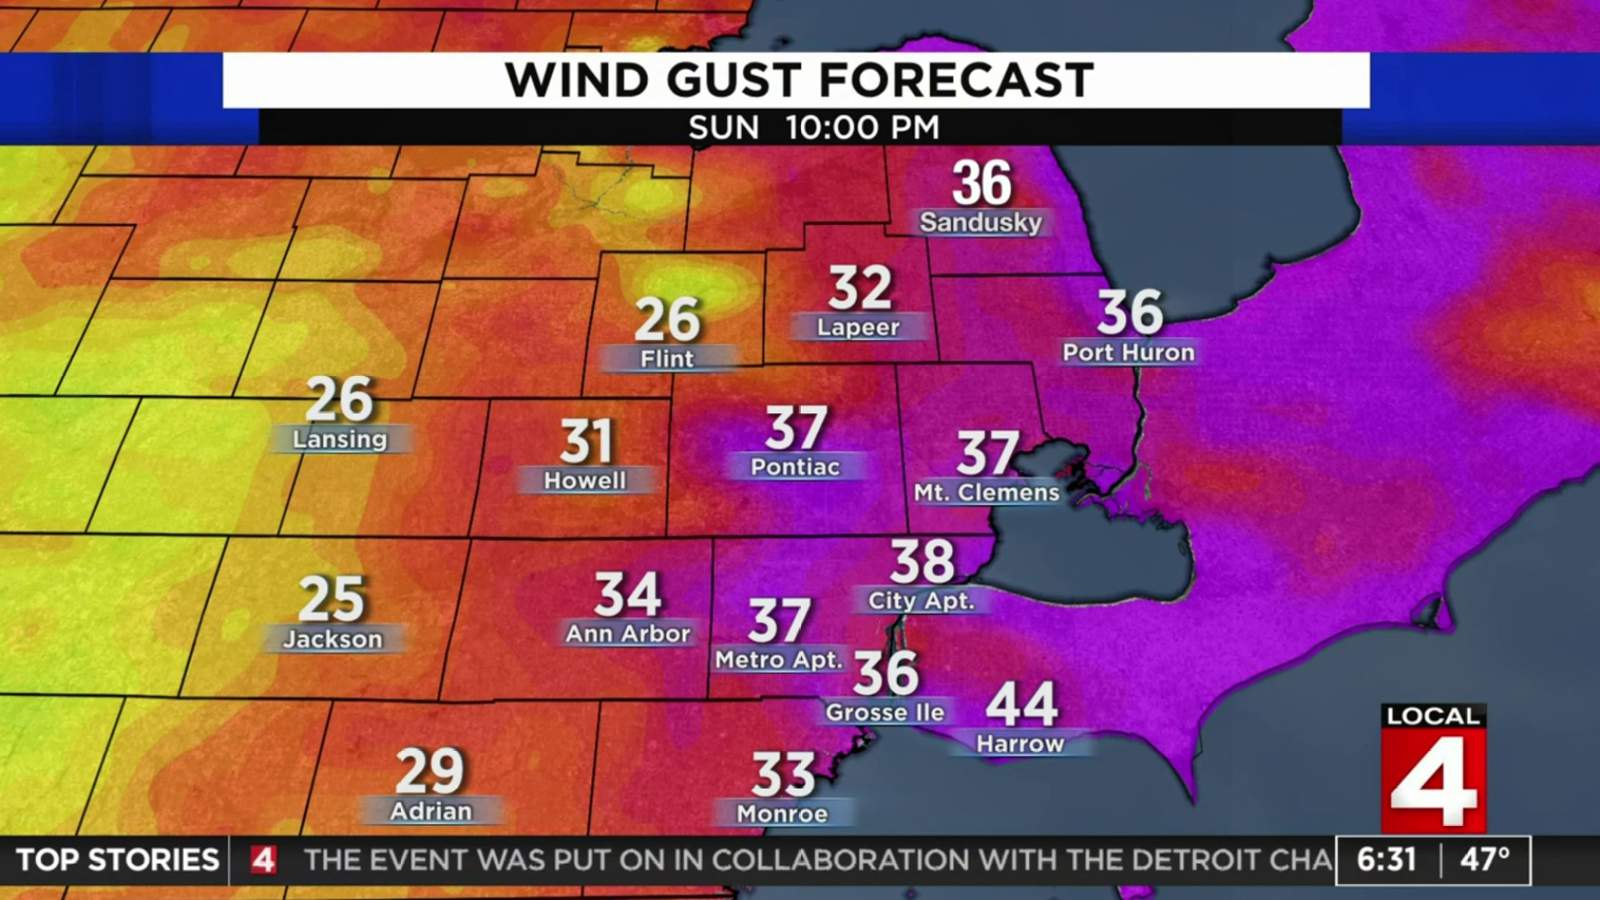 Wind advisory issued for Metro Detroit, counties outside region